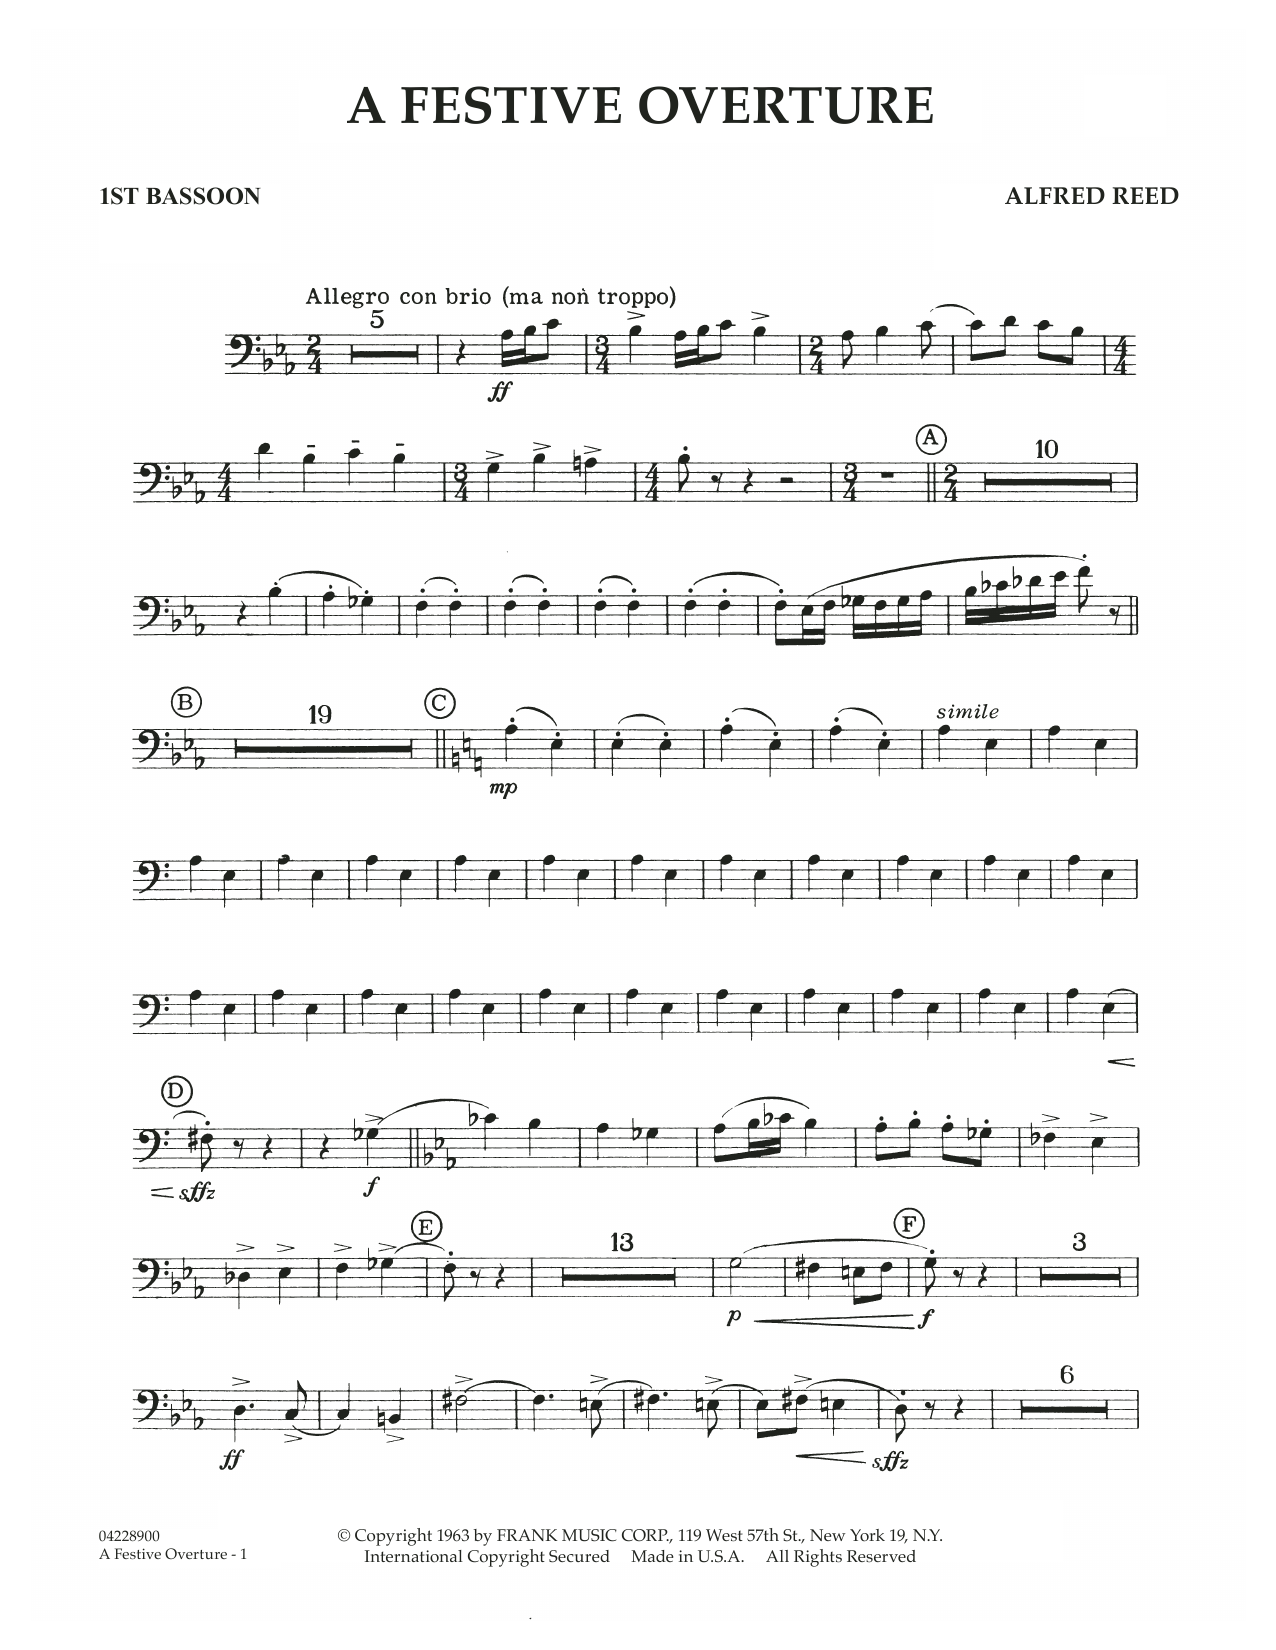 alfred reed first suite for band pdfs